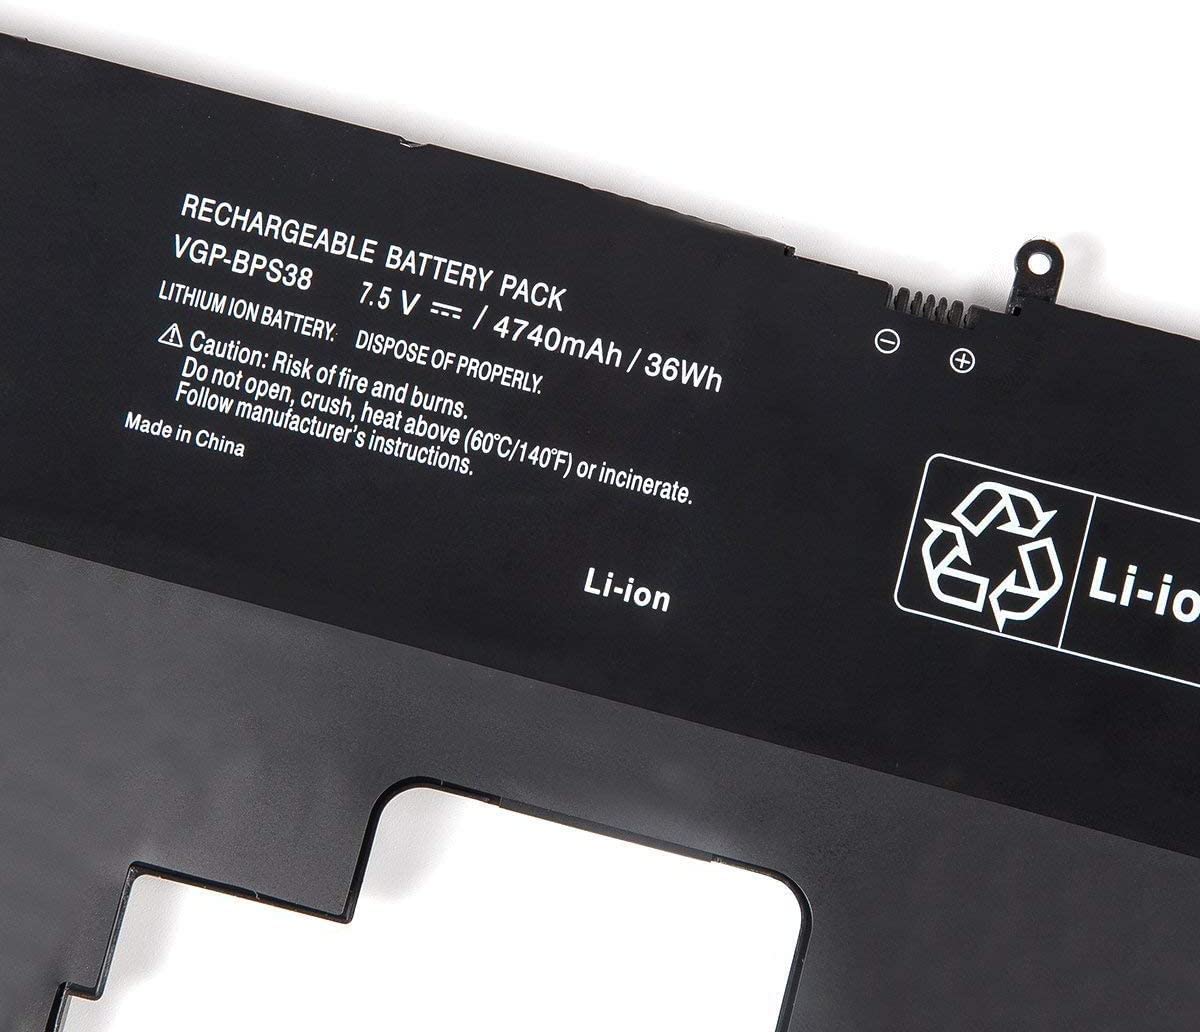 WISTAR LAPTOP BATTERY Sony VGP-BPS38 Battery for Vaio Pro 11 Pro 13 P11226SCBI P132200C P13226SC P13227SC SVP112100C SVP13217SC SVP13218SC Series Notebook